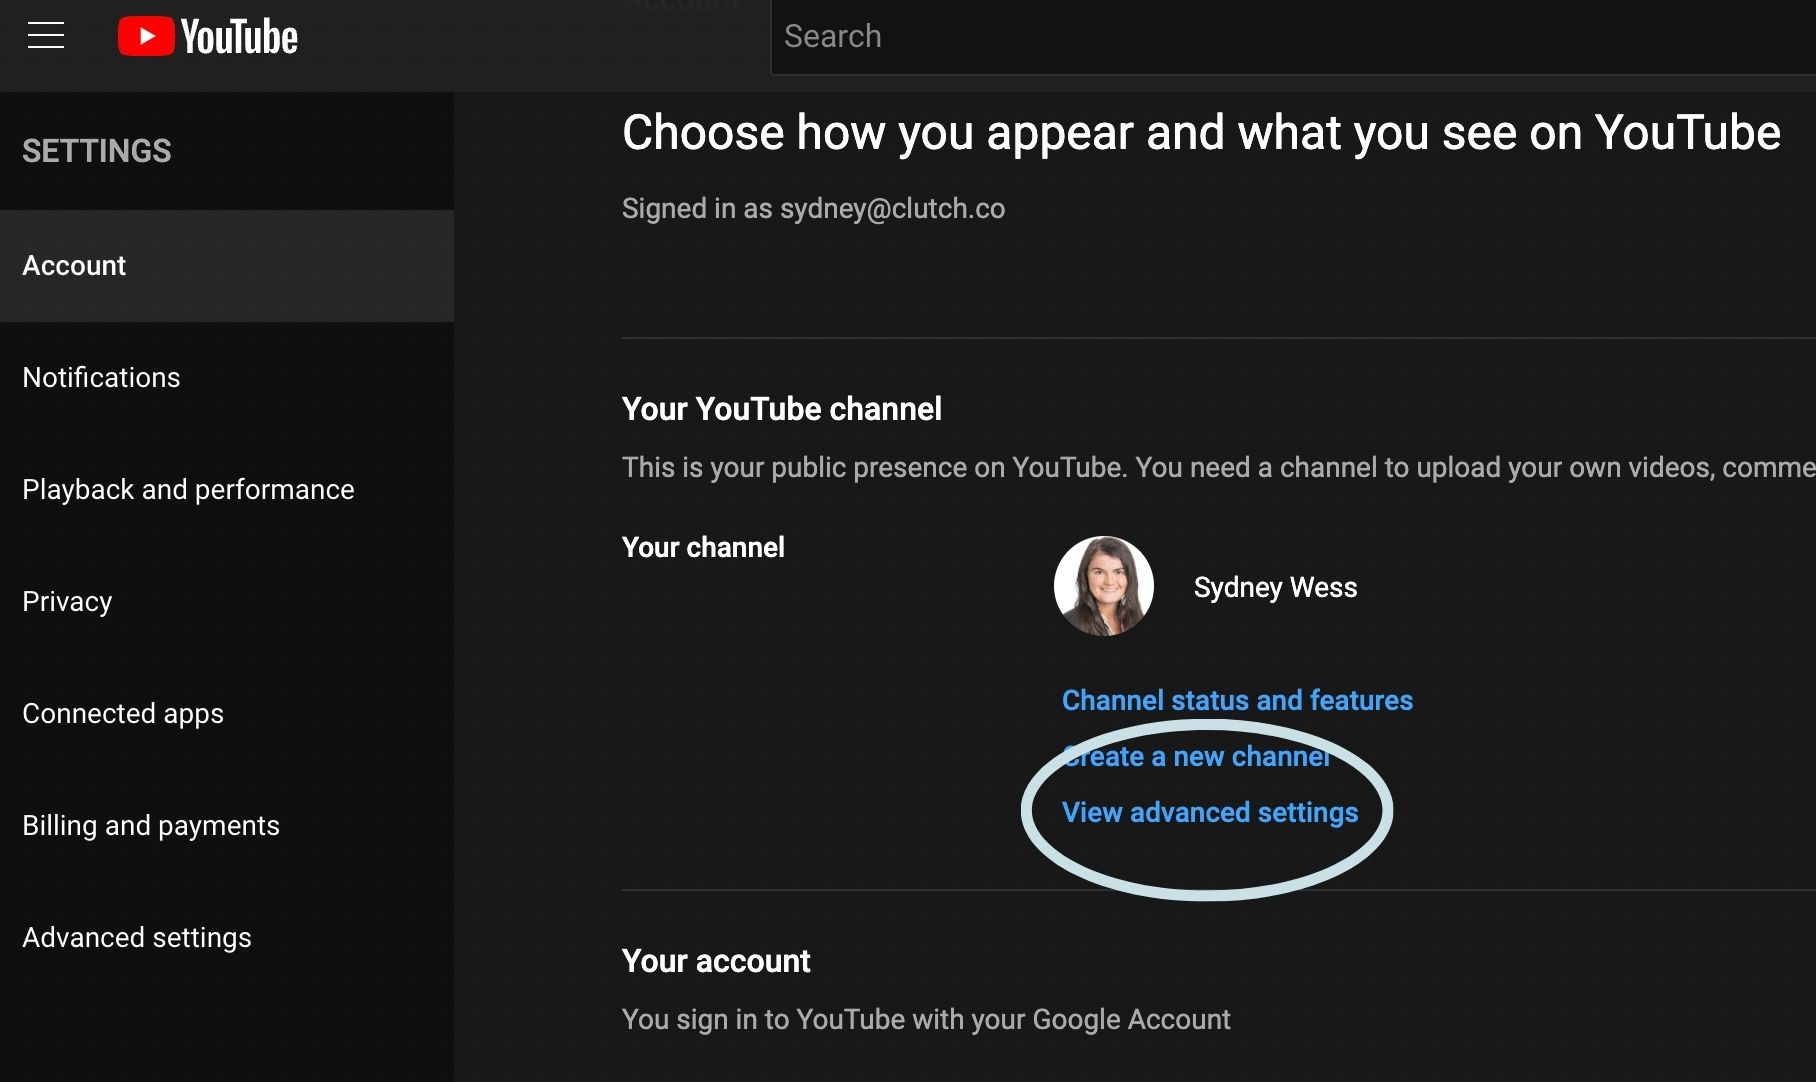 How to Delete a YouTube Channel - step 3: advanced settings